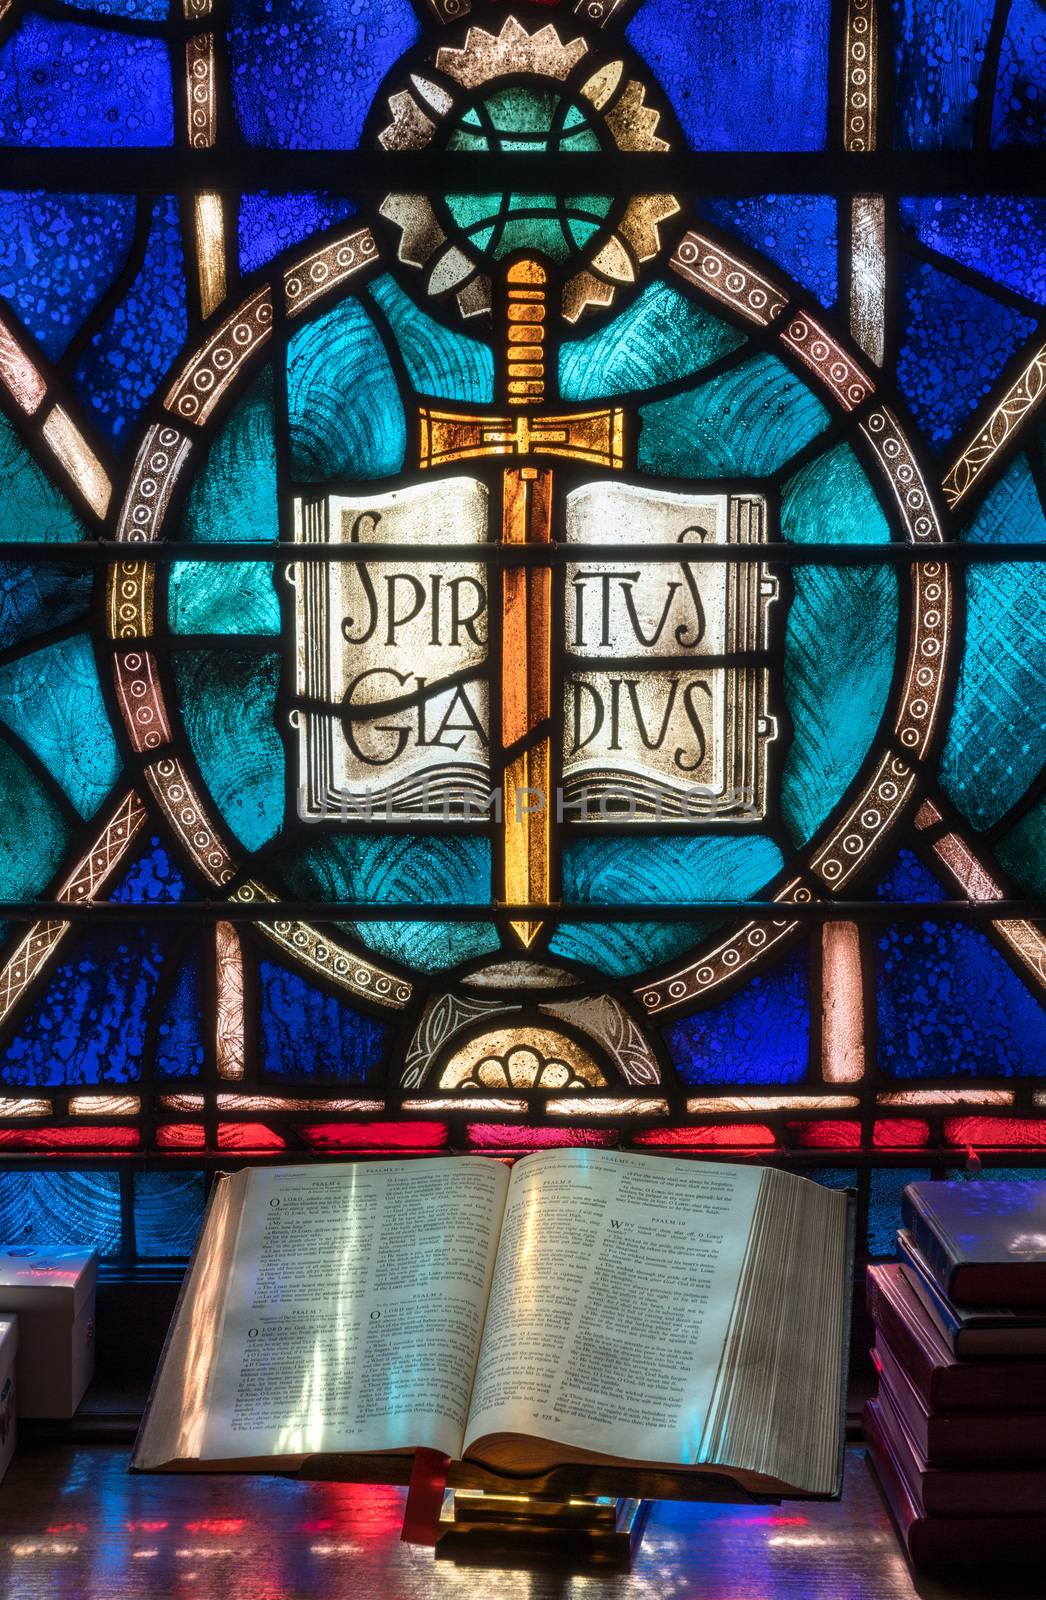 Light from stained glass window falls on open bible in american church by steheap